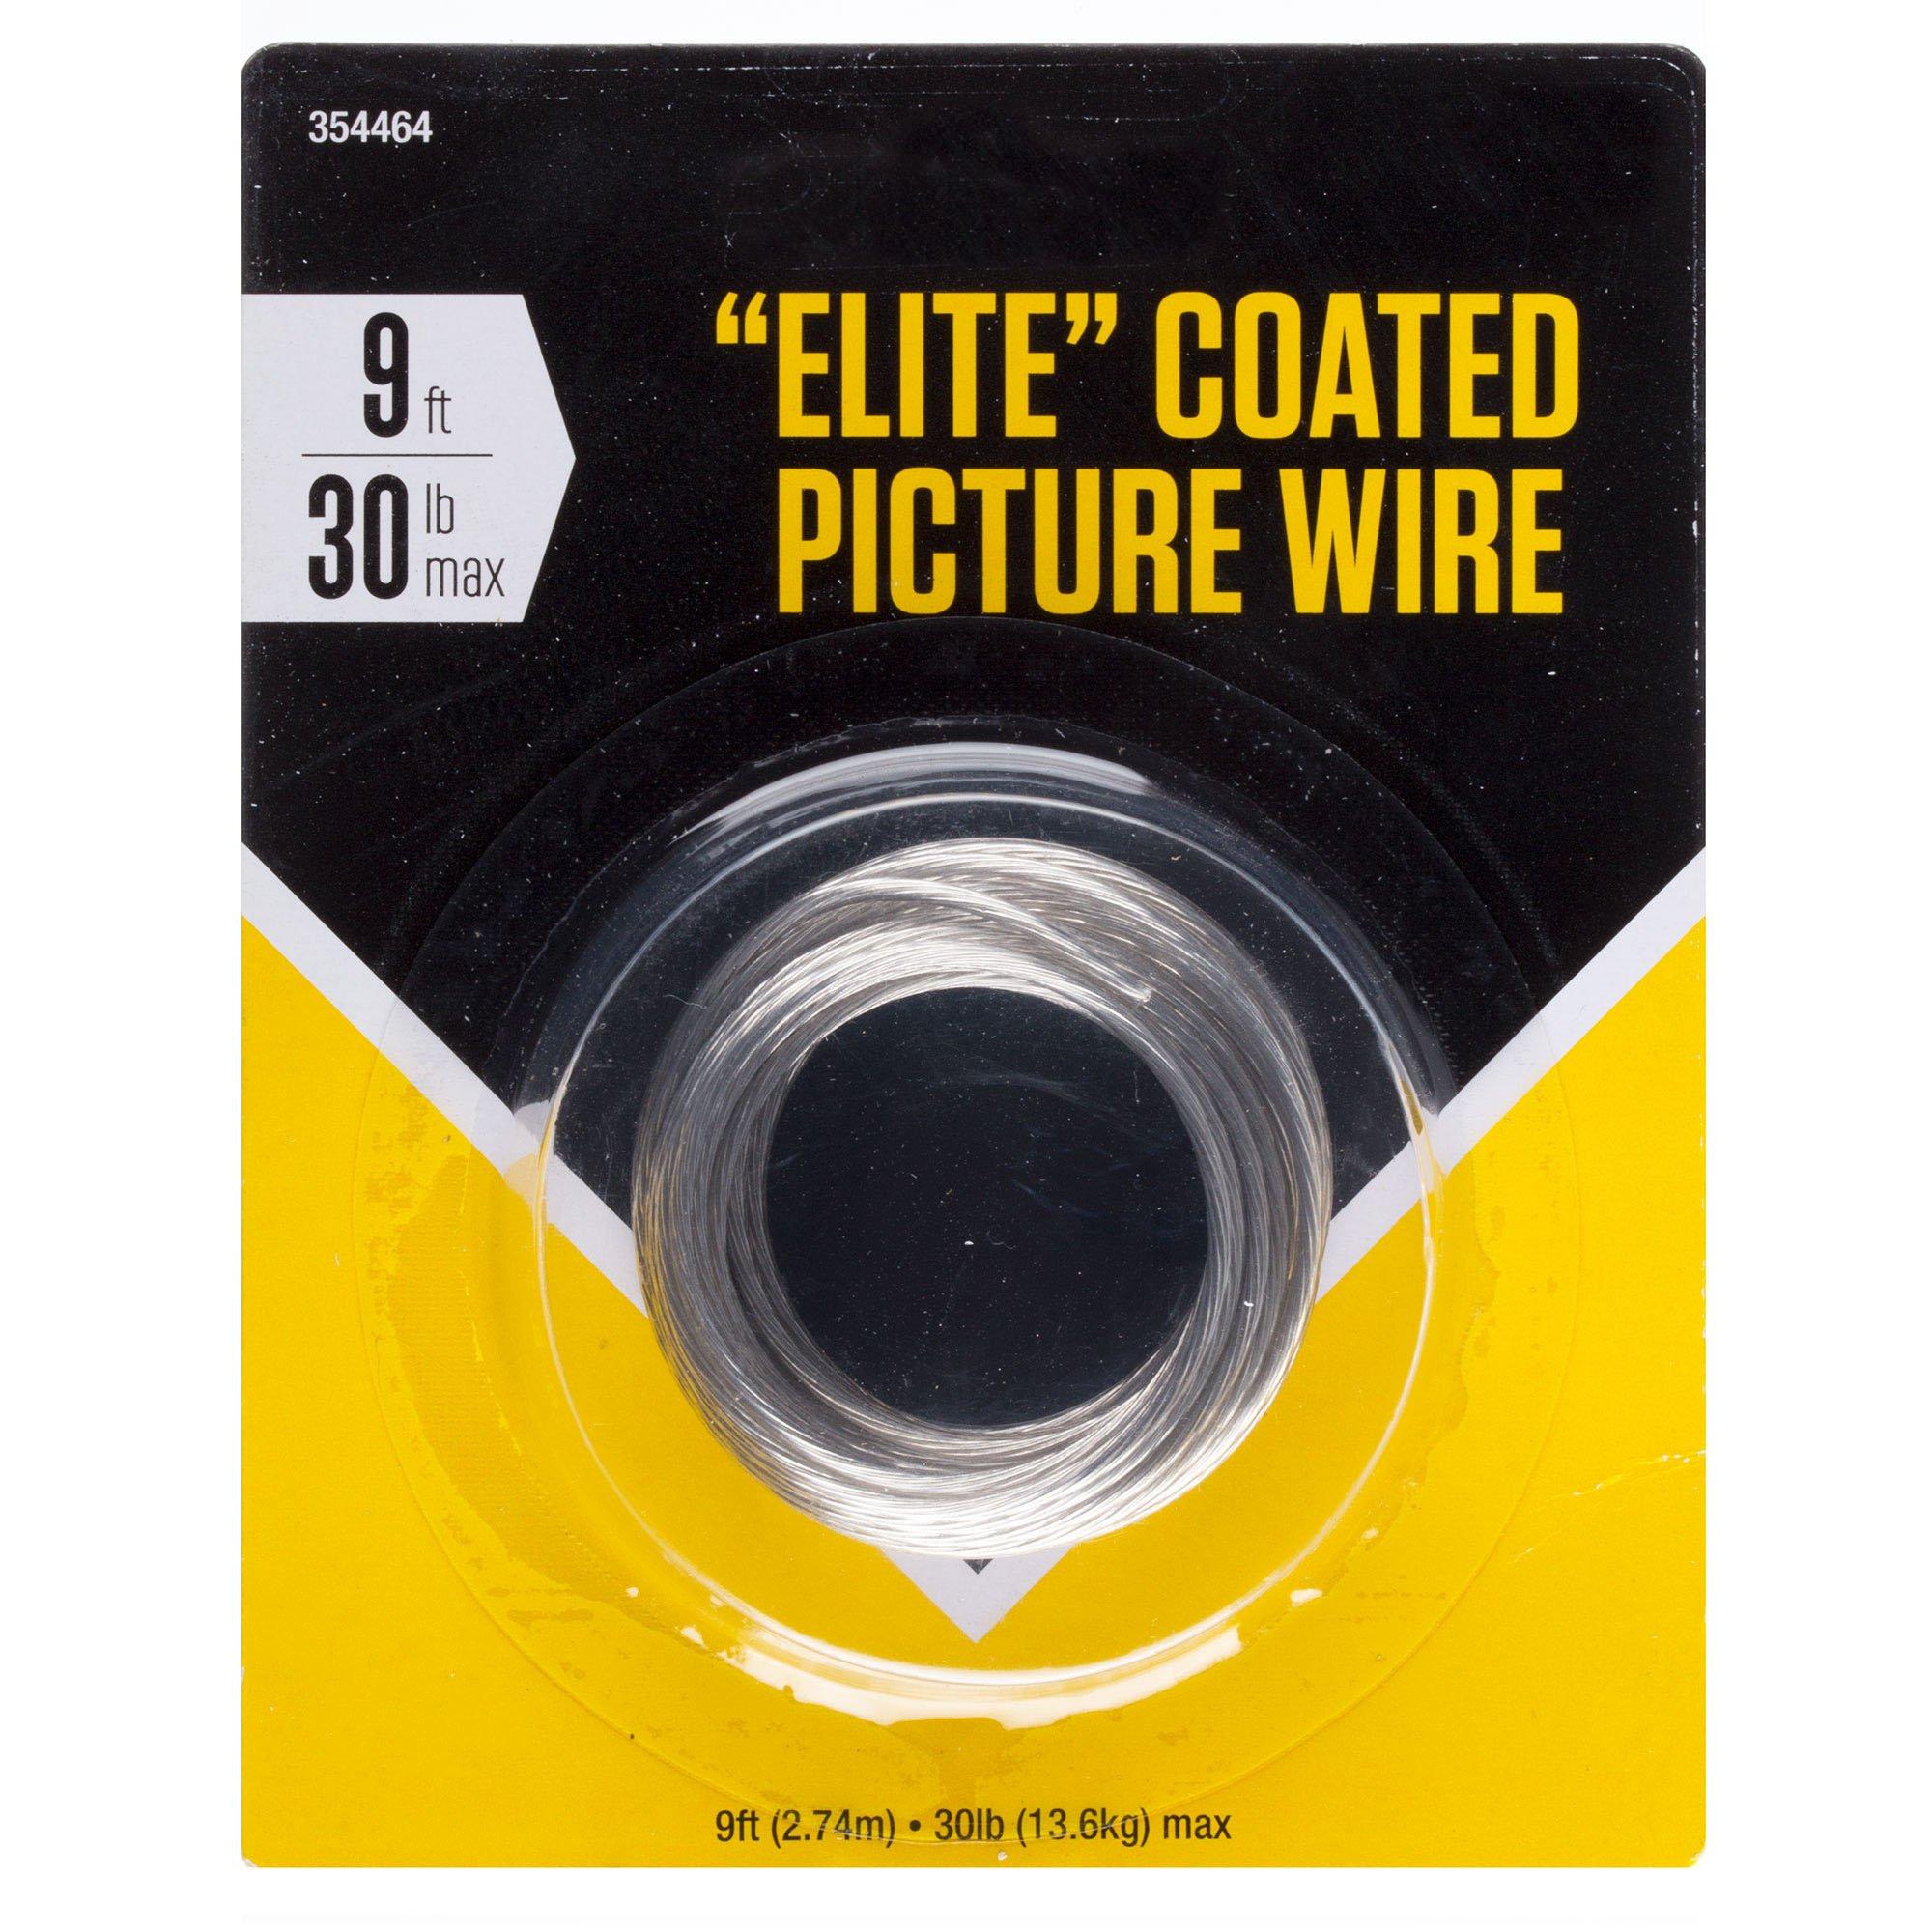 OOK Steel-Plated Picture Wire 30 lb 1 pk - Ace Hardware